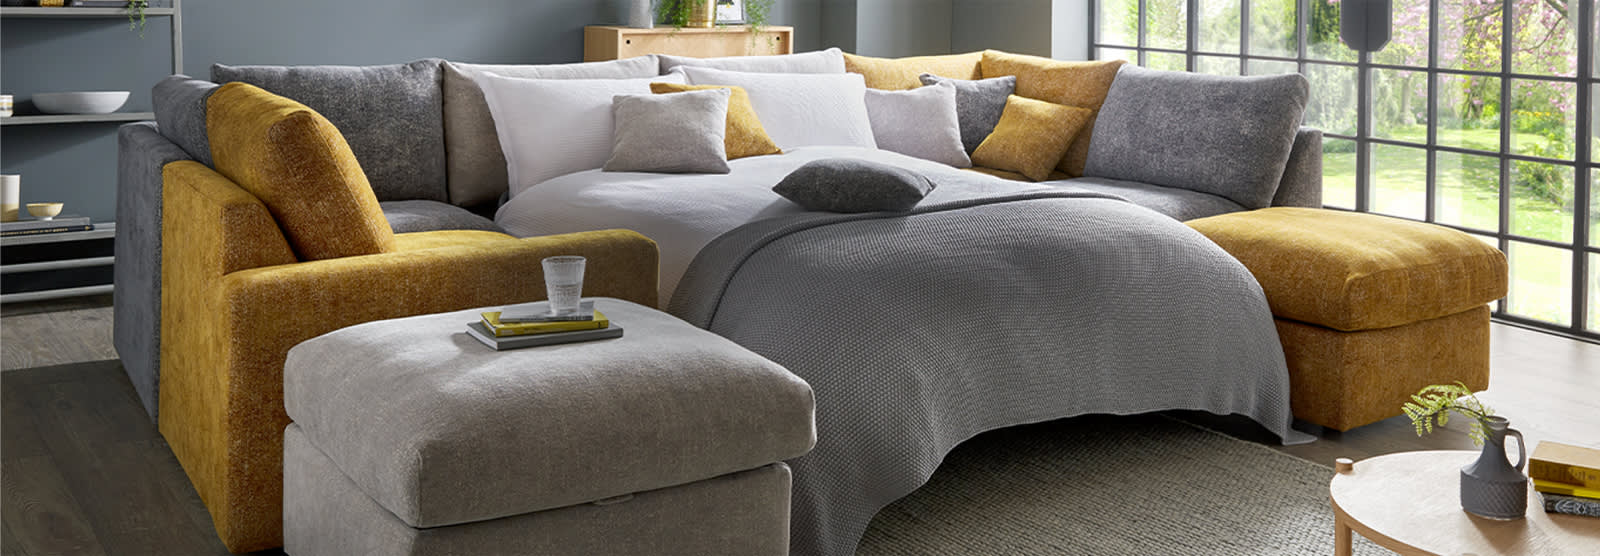 a-buying-guide-for-sofa-beds-sofology